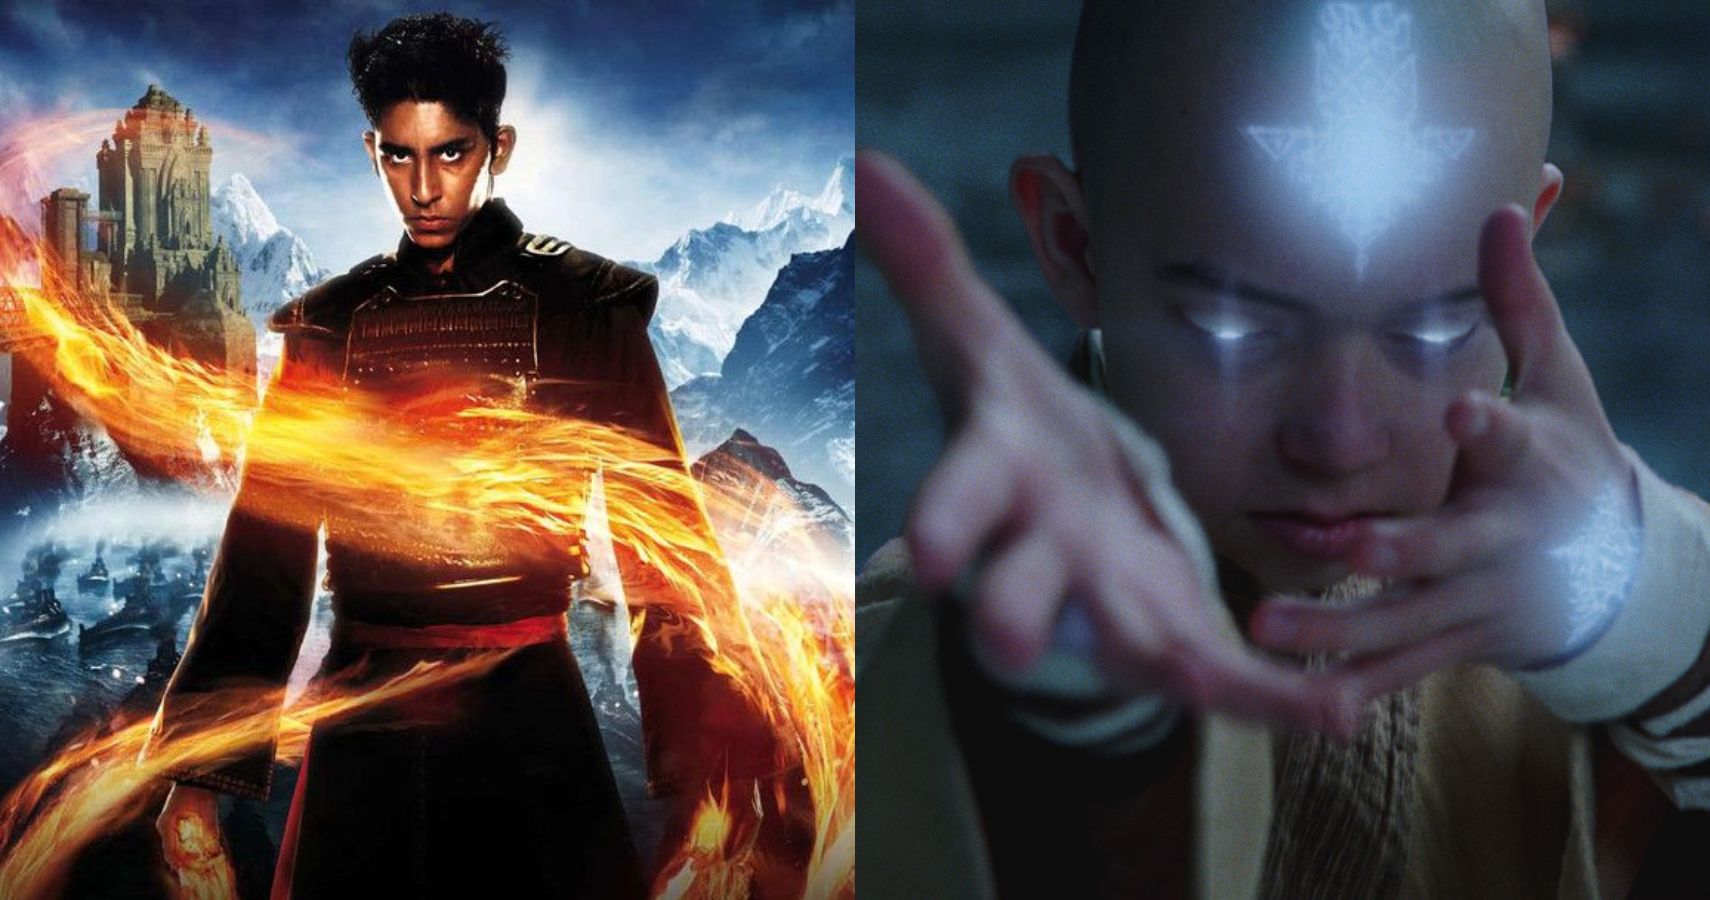 The Last Airbender 10 Things The Netflix Series Can Learn From The Failed Movie